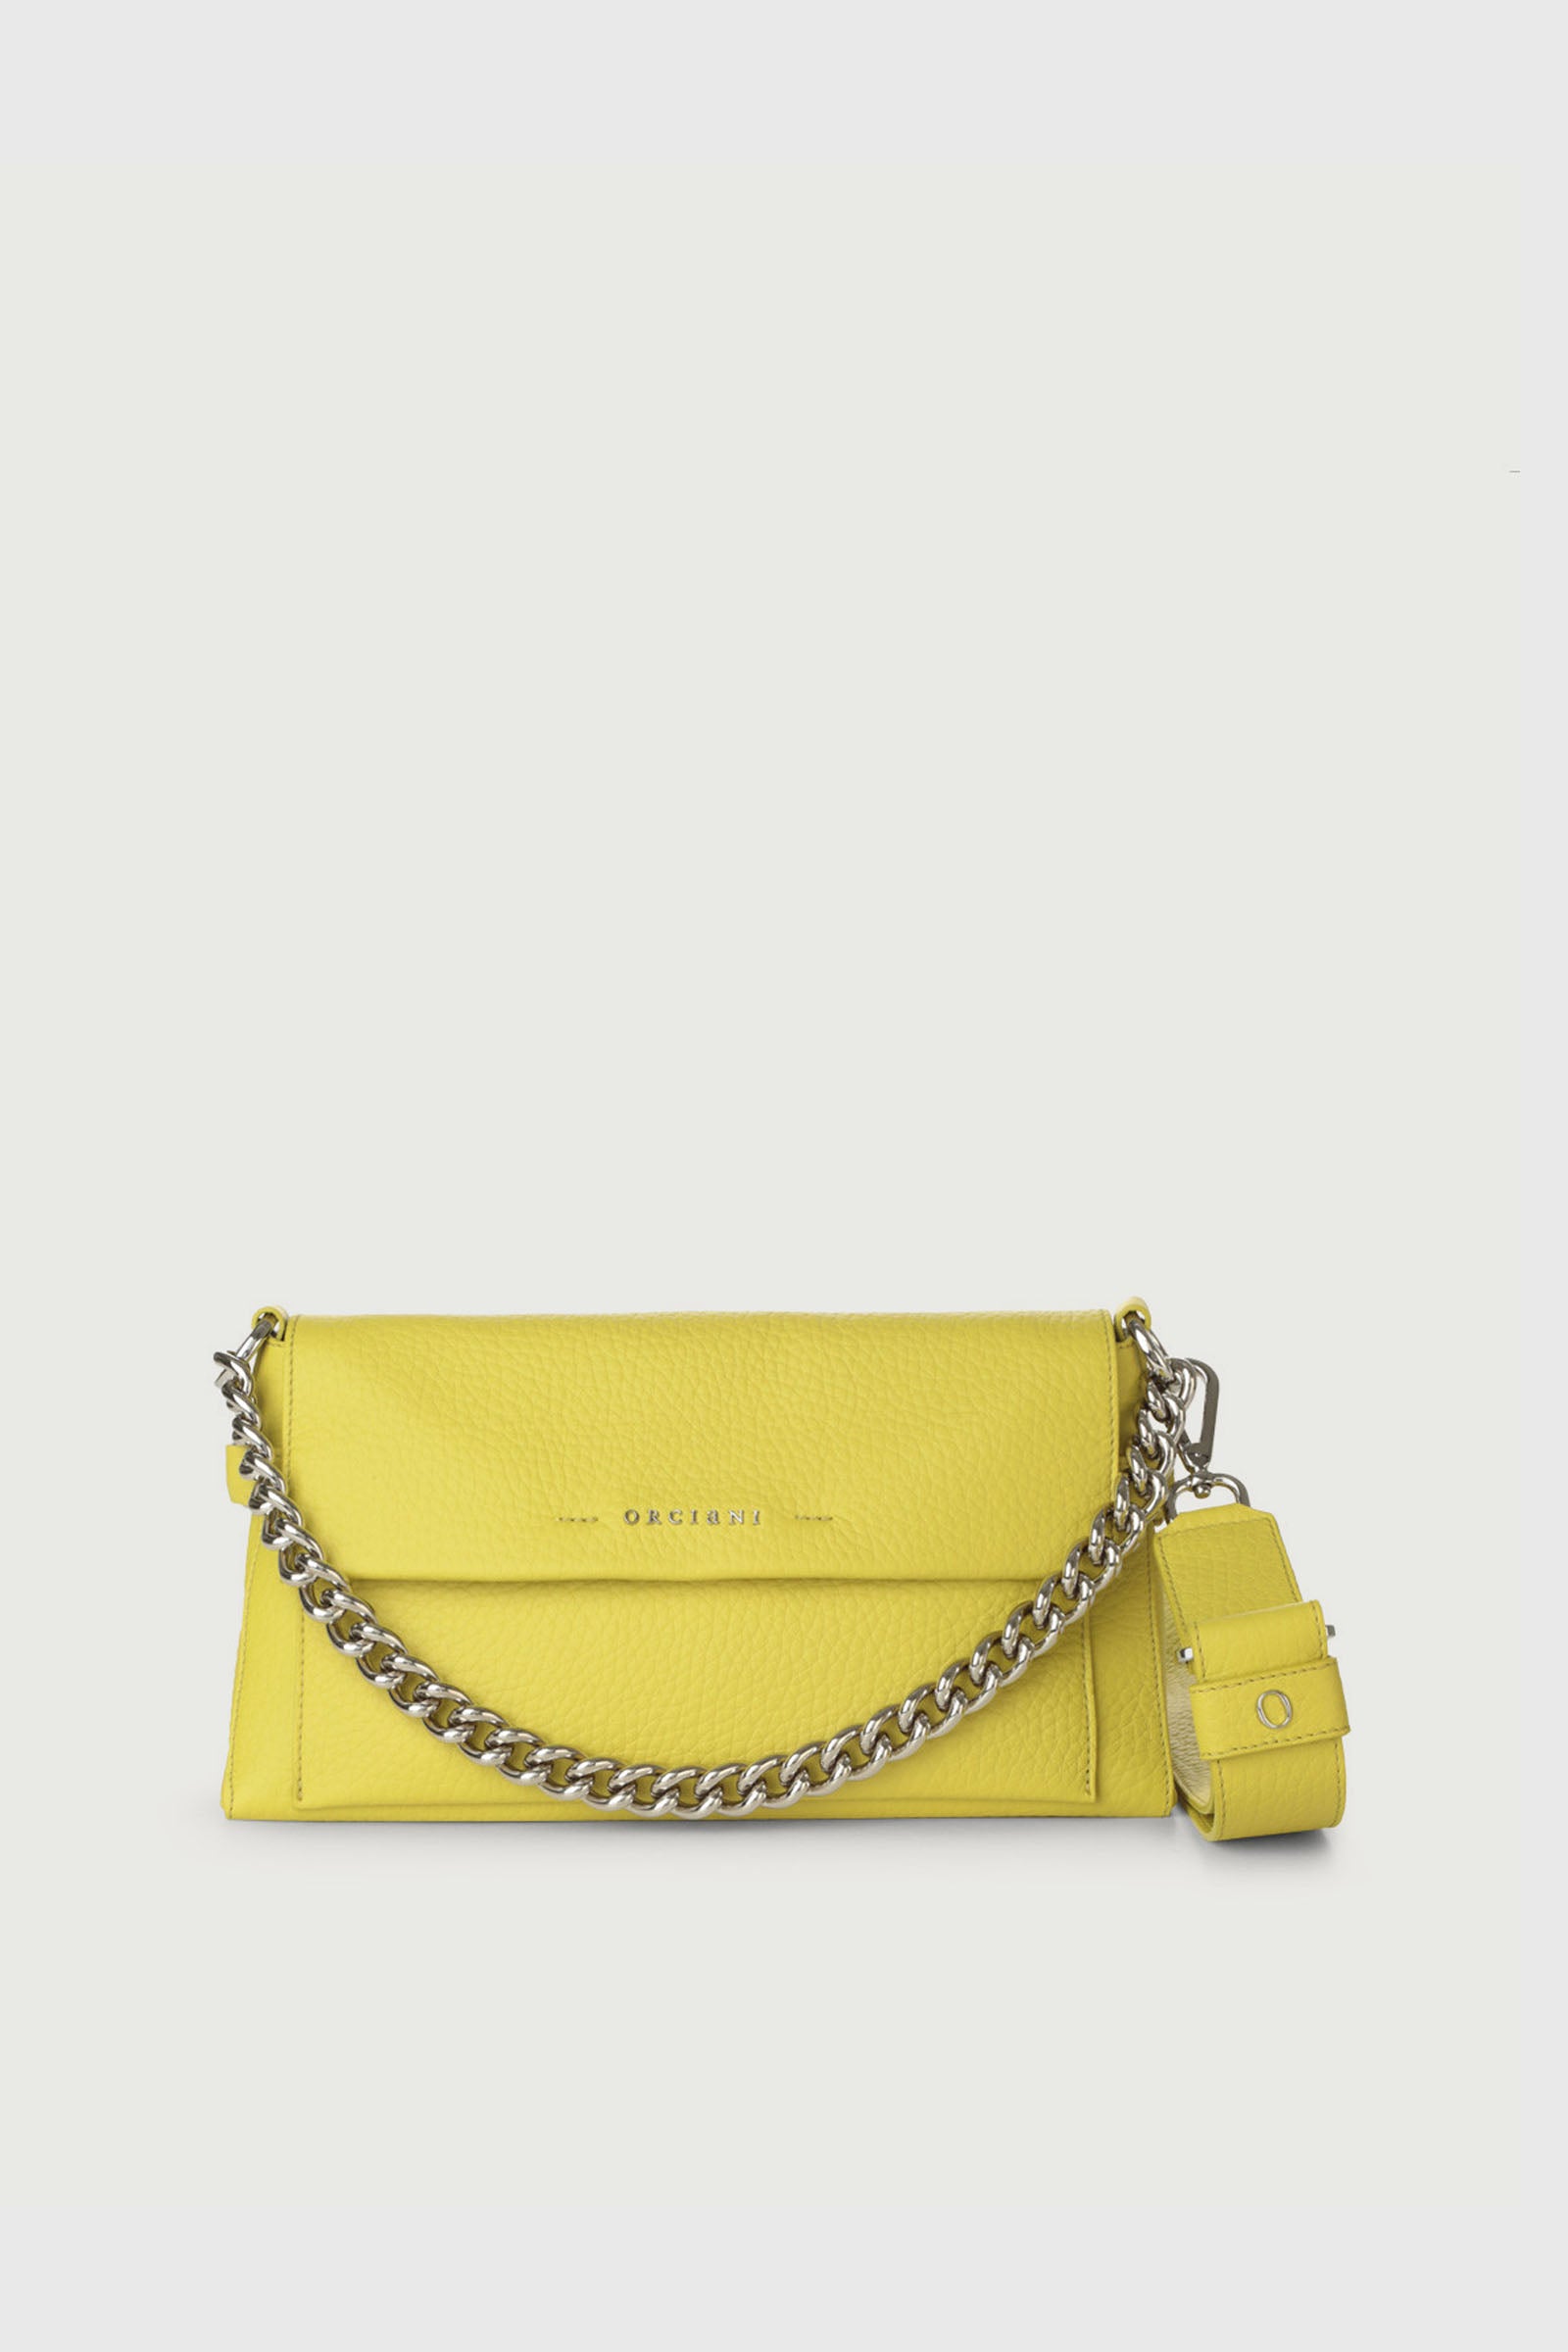 Orciani Shoulder Bag Missy Longuette Soft in Yellow Leather - 1